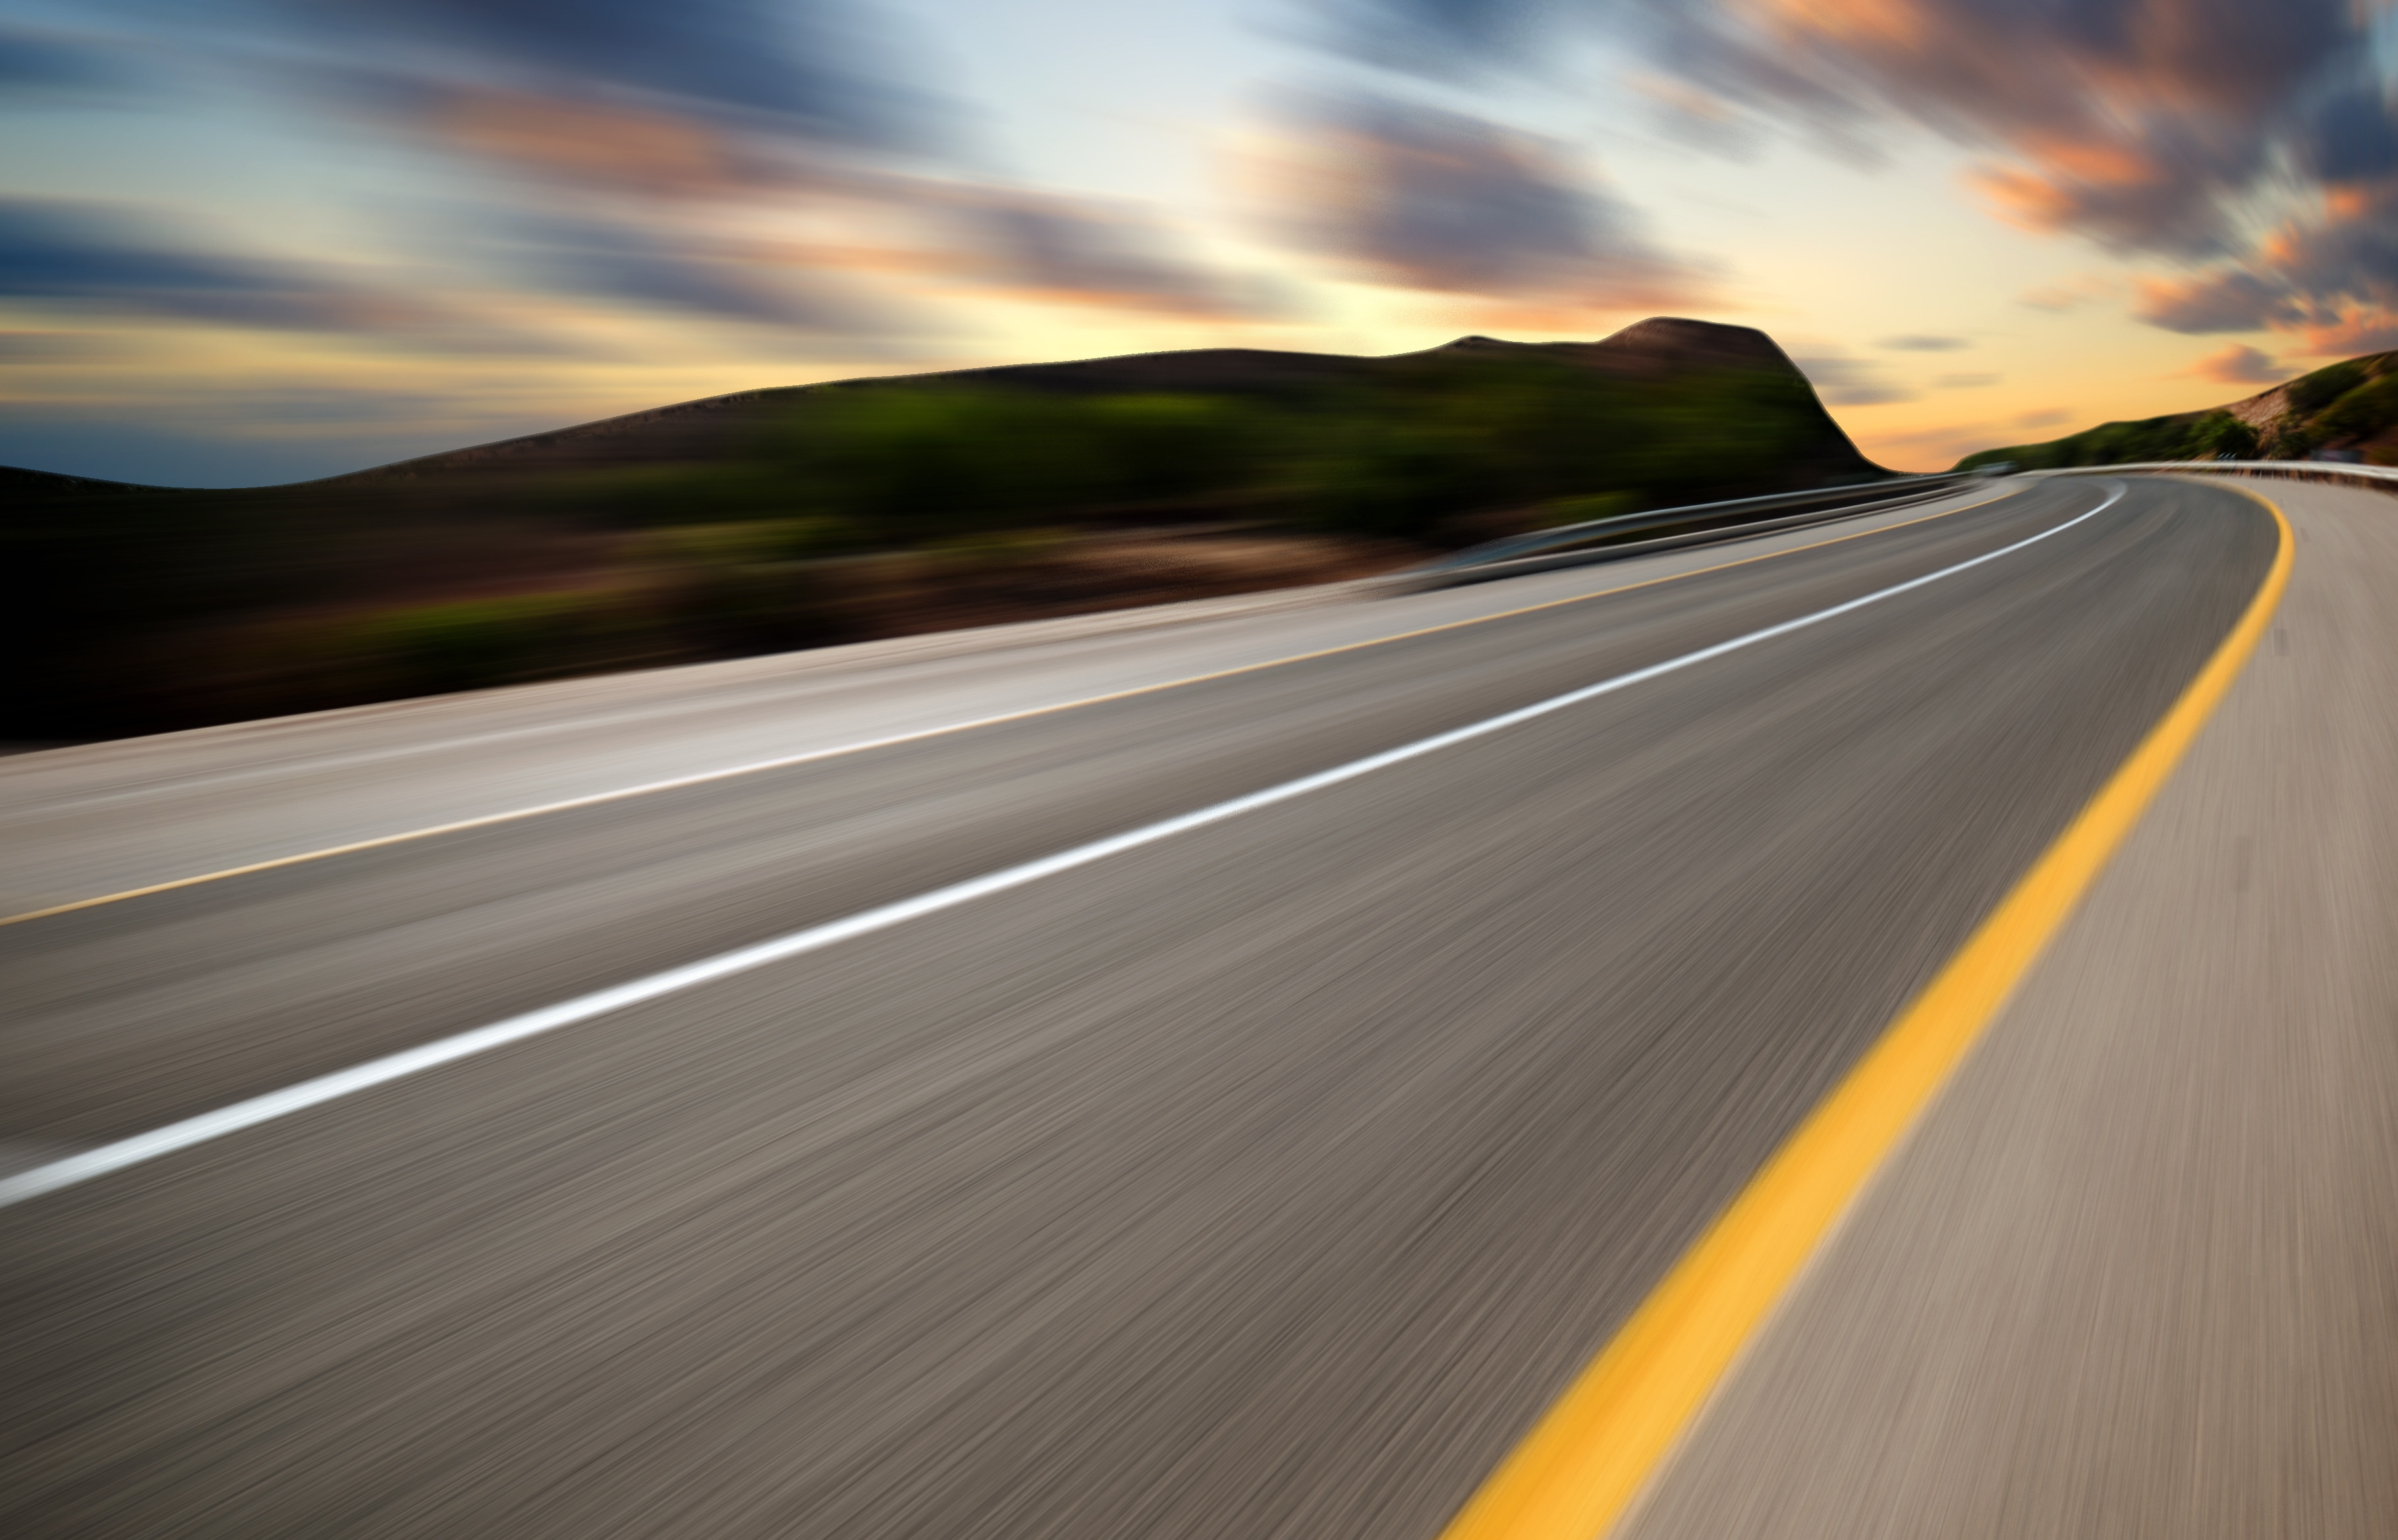 Background Slide With Highway - HD Wallpaper 